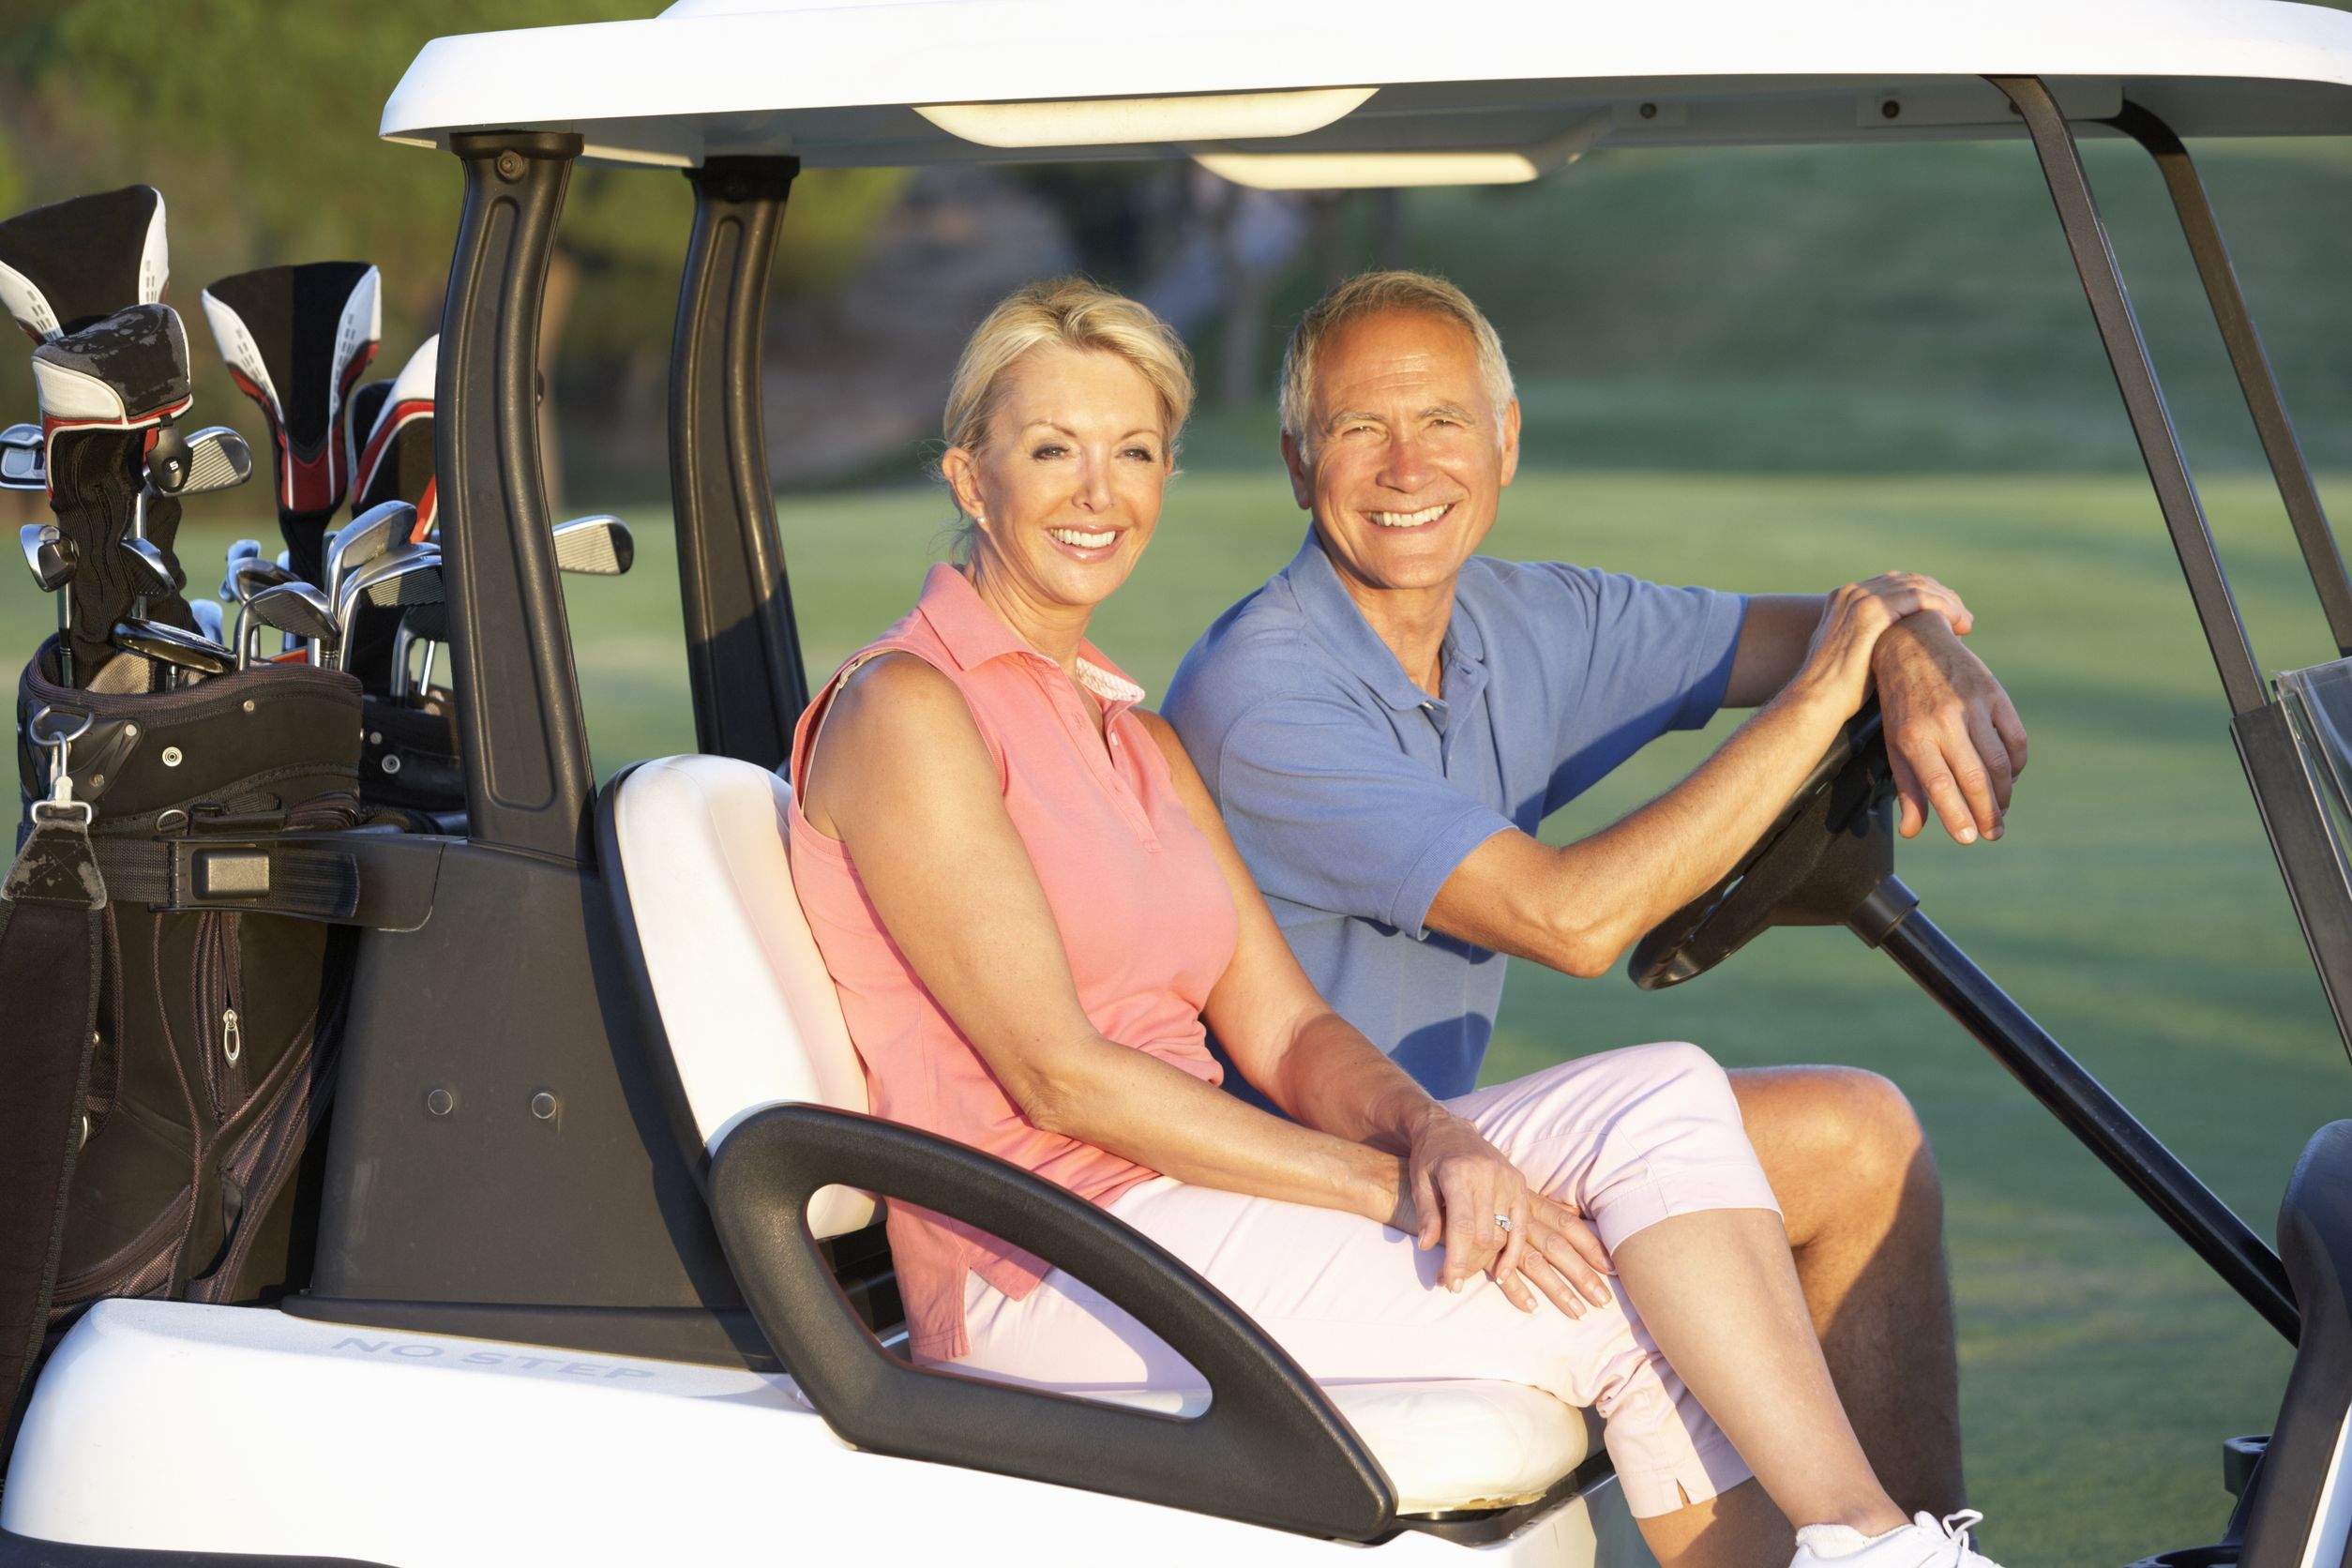 How to Choose the Right Men’s Clothing Items for Golfing in Charleston, SC